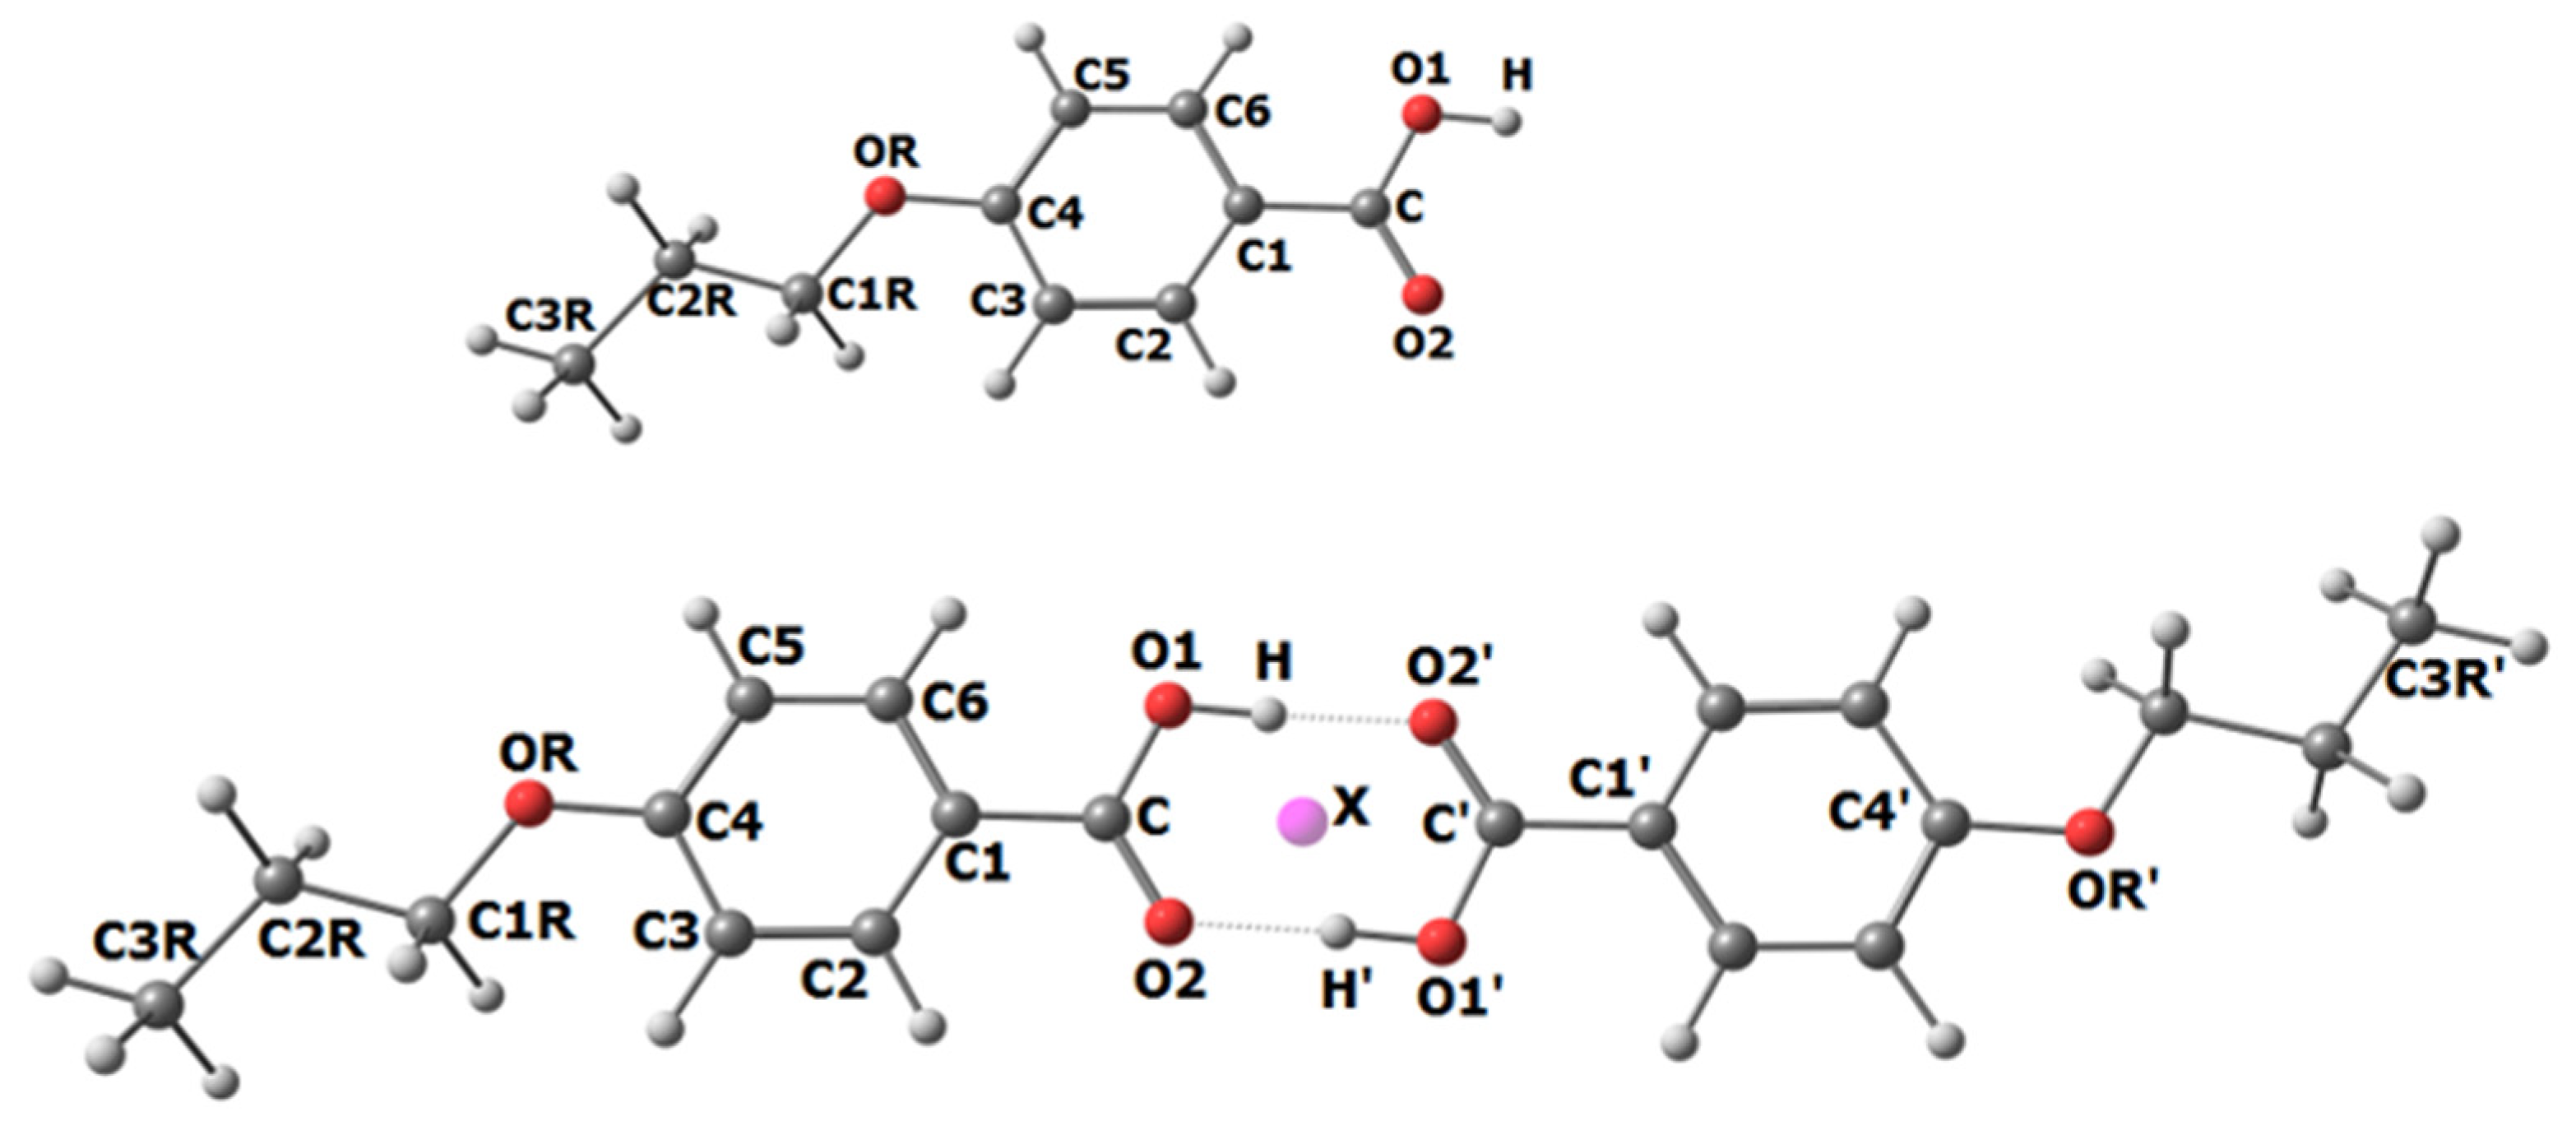 IJMS | Free Full-Text | Cyclic Dimers of 4-n-Propyloxybenzoic Acid with ...